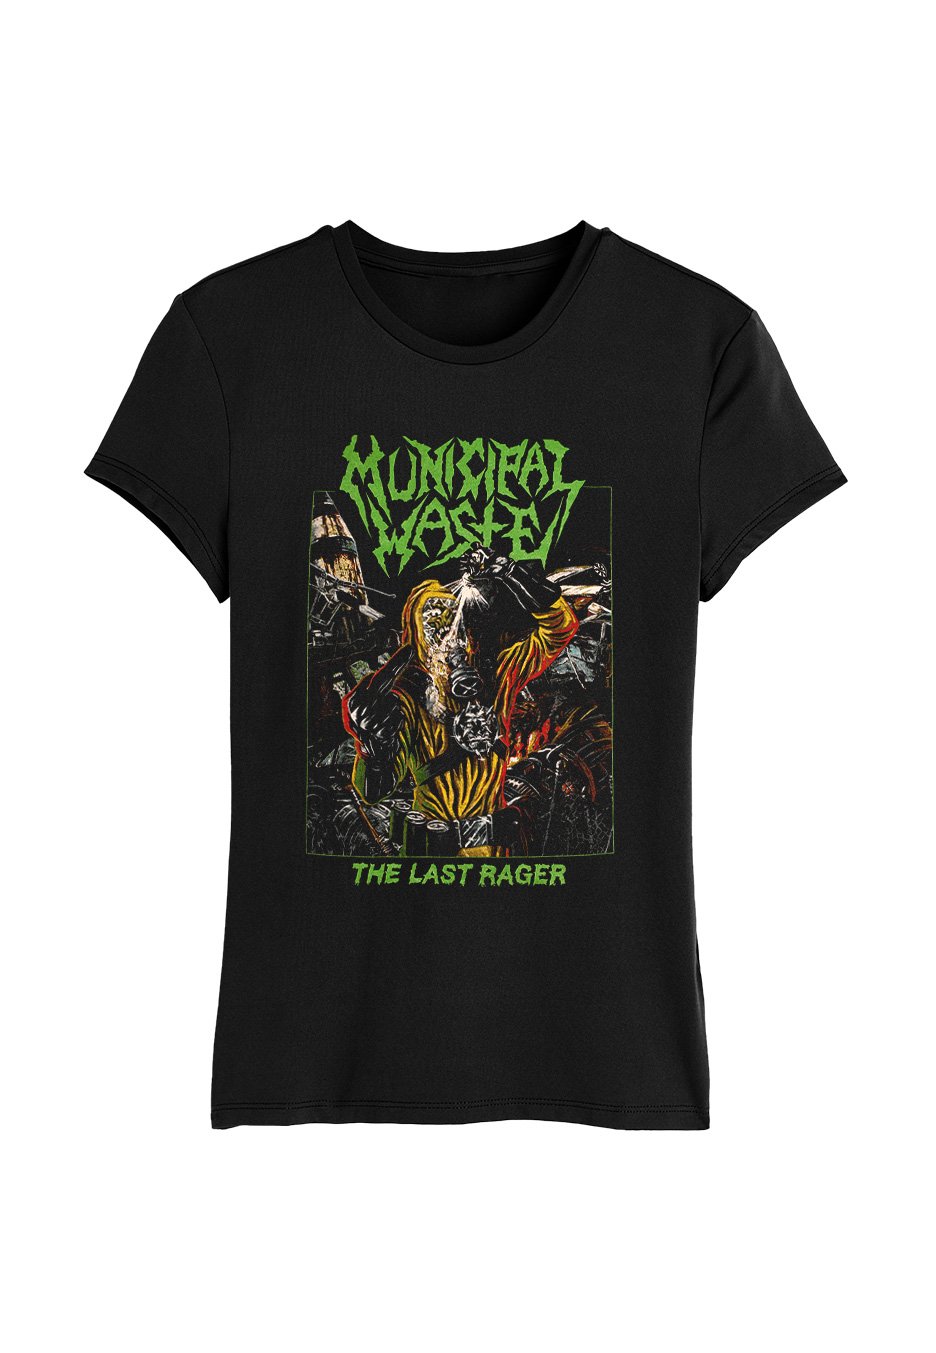 Municipal Waste - The Last Rager - Girly